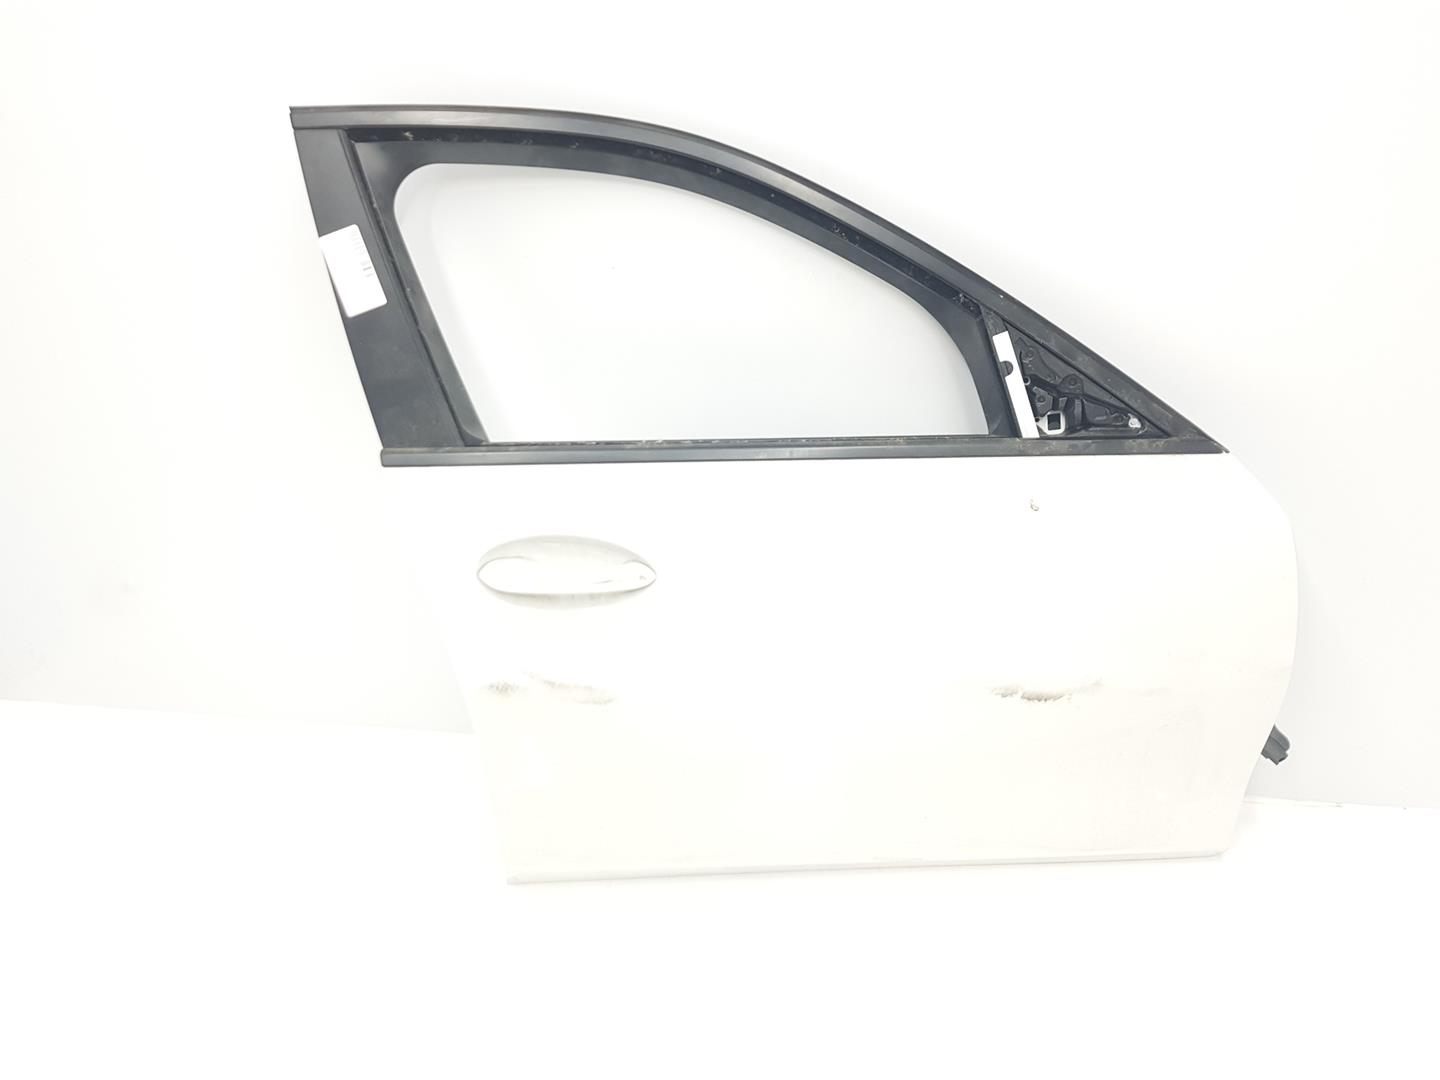 BMW 3 Series G20/G21/G28 (2018-2024) Front Right Door 7482276, 41517482276, COLORBLANCO300 24136229